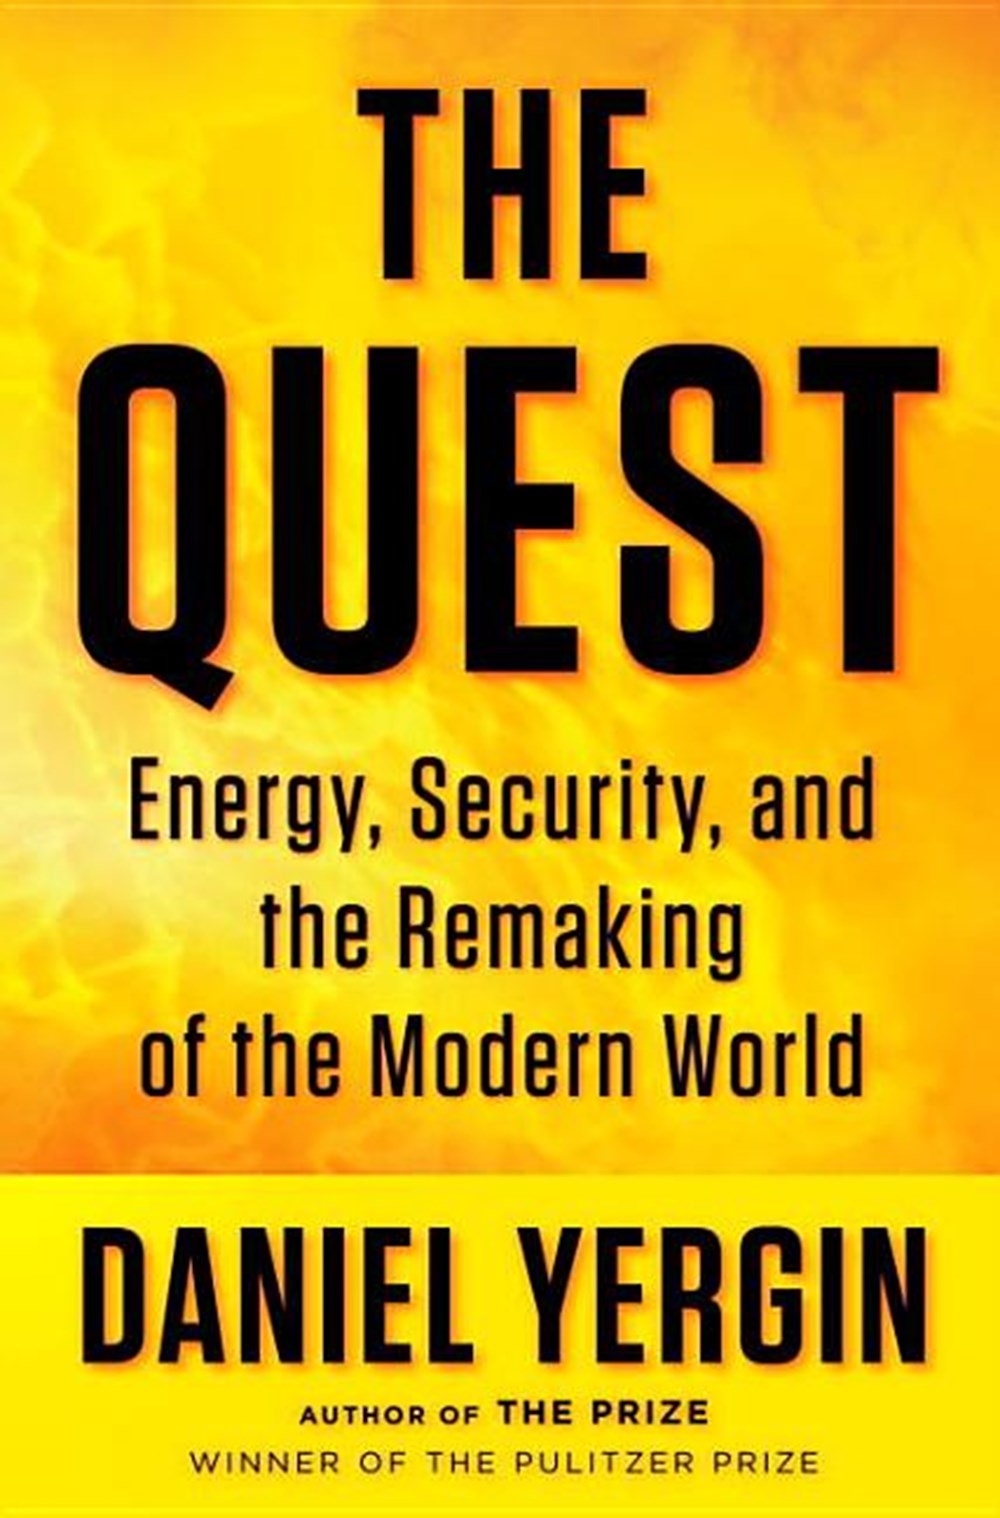 Quest: Energy, Security, and the Remaking of the Modern World